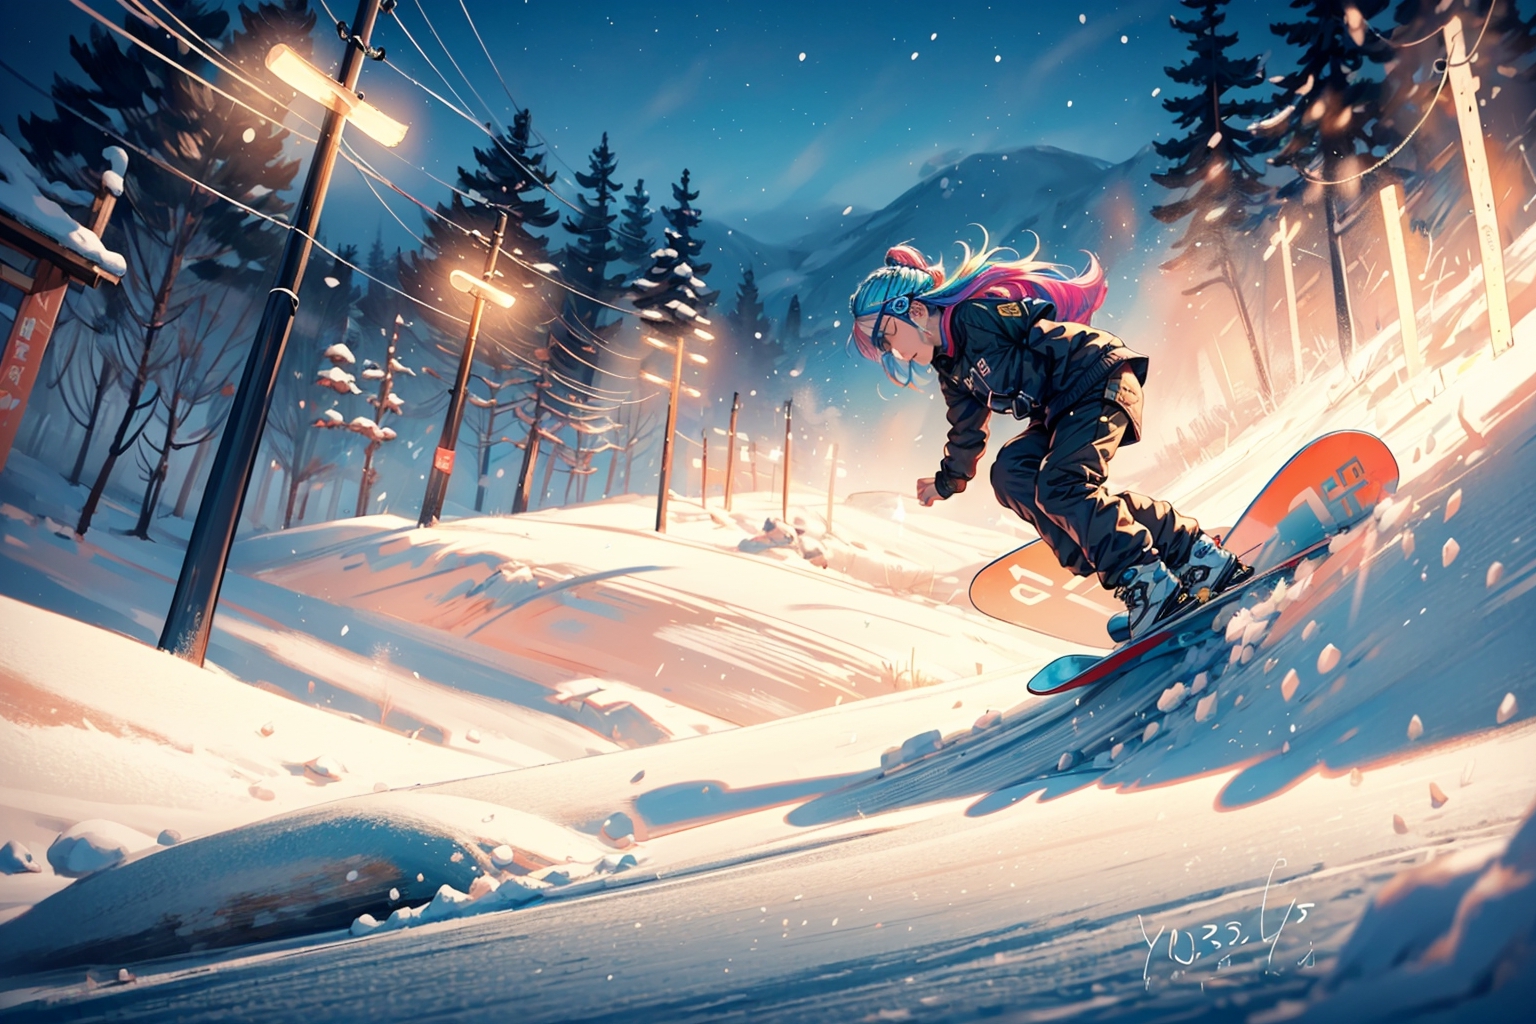 Look: Snowboarder Embodies Favorite Anime Character On The Slopes -  Snowboarder